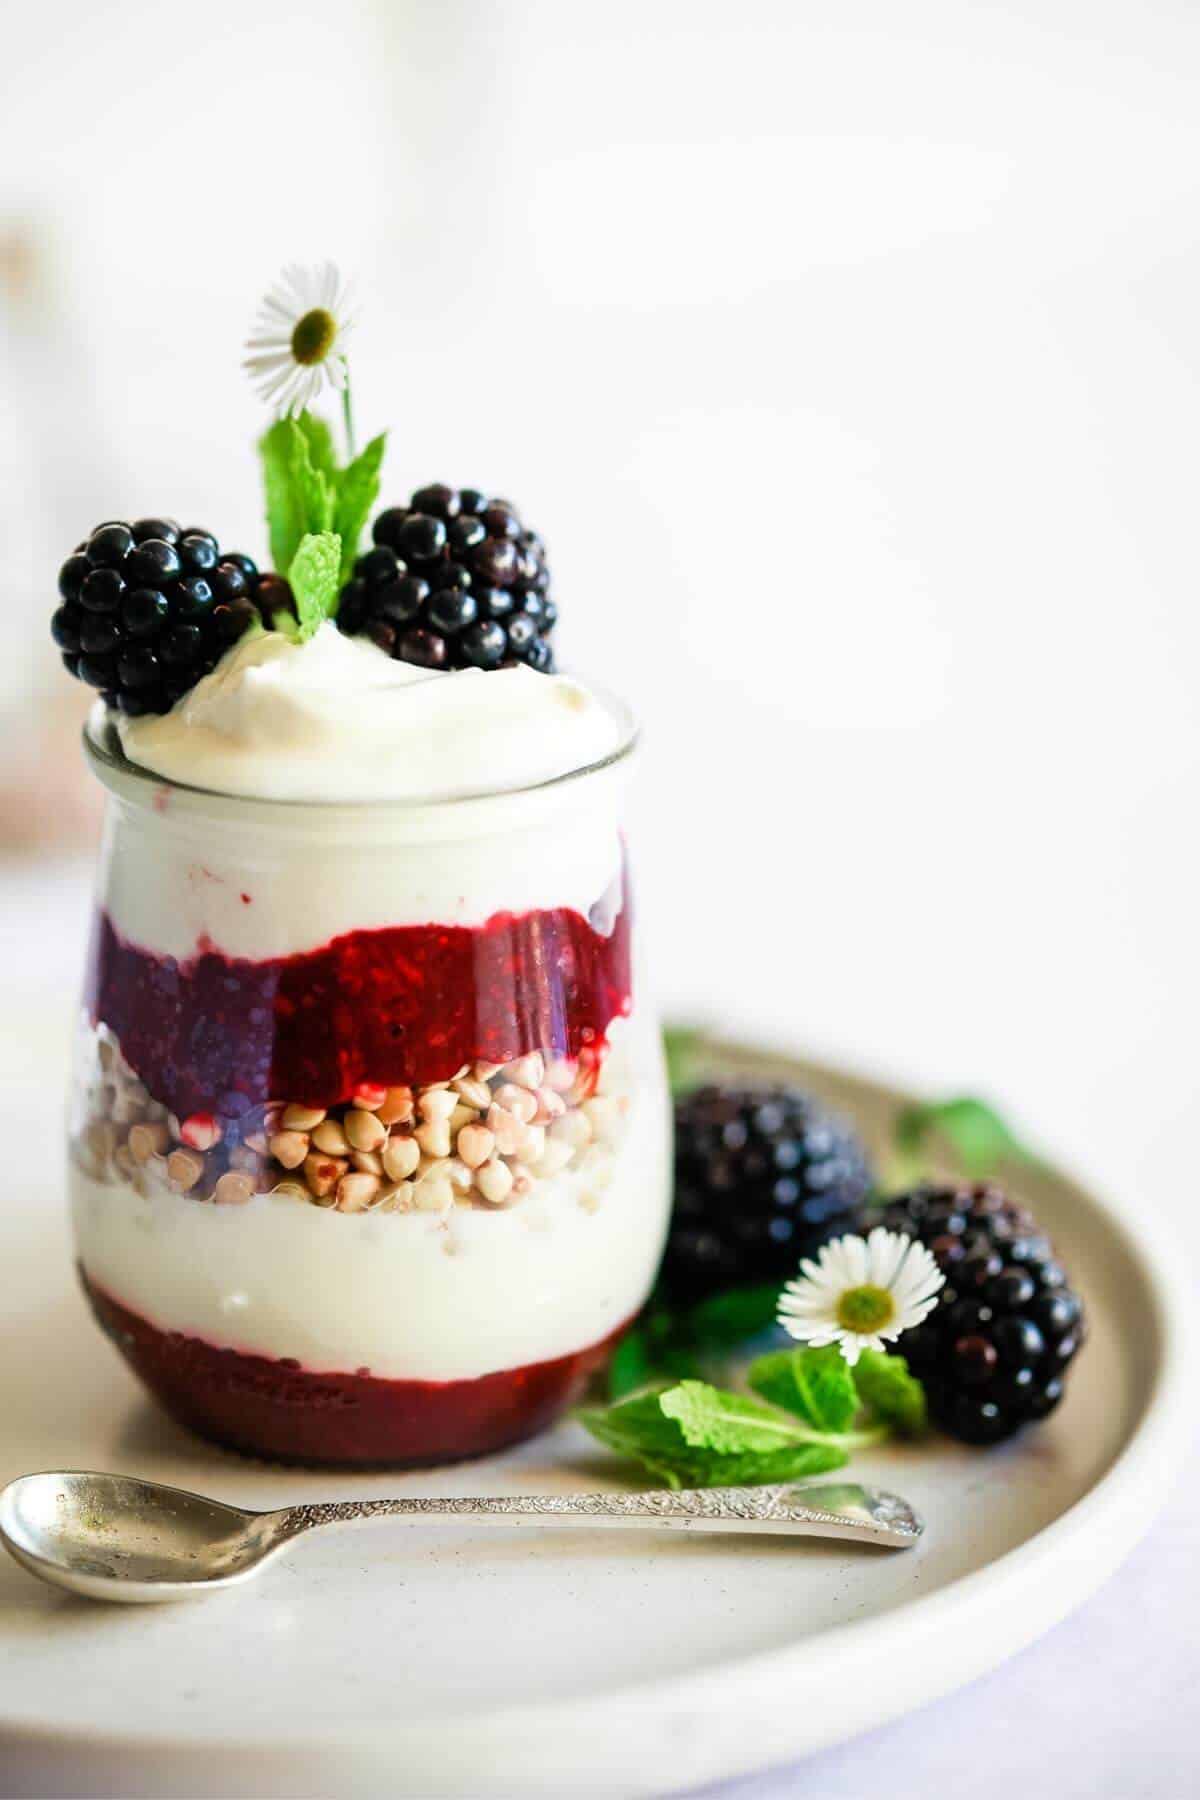 A blackberry parfait with a silver spoon sitting on a small plate garnished with mint leaves, daisies and fresh blackberries.